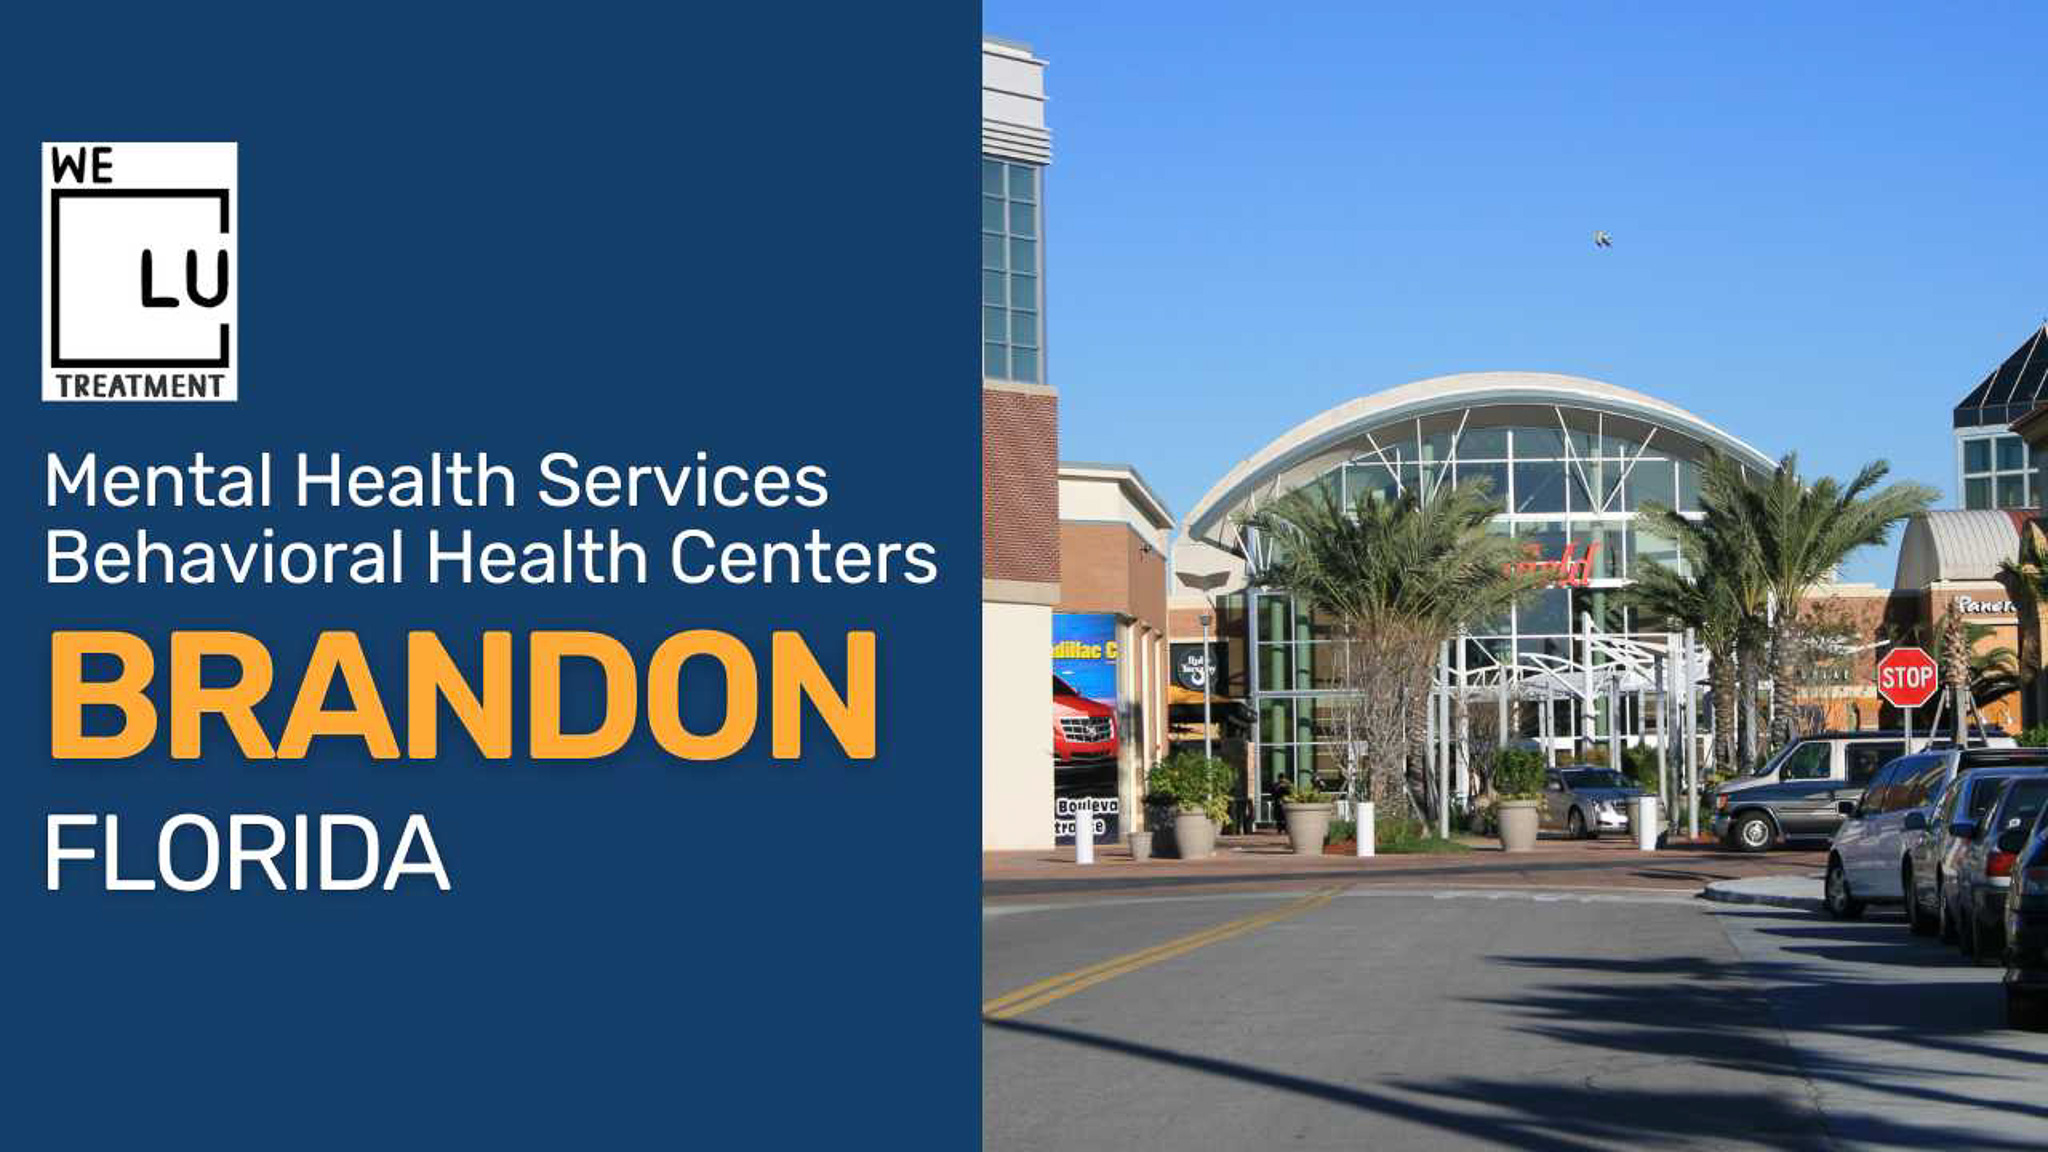 Brandon FL (MH) We Level Up treatment center for drug and alcohol rehab detox and mental health services - Image 1